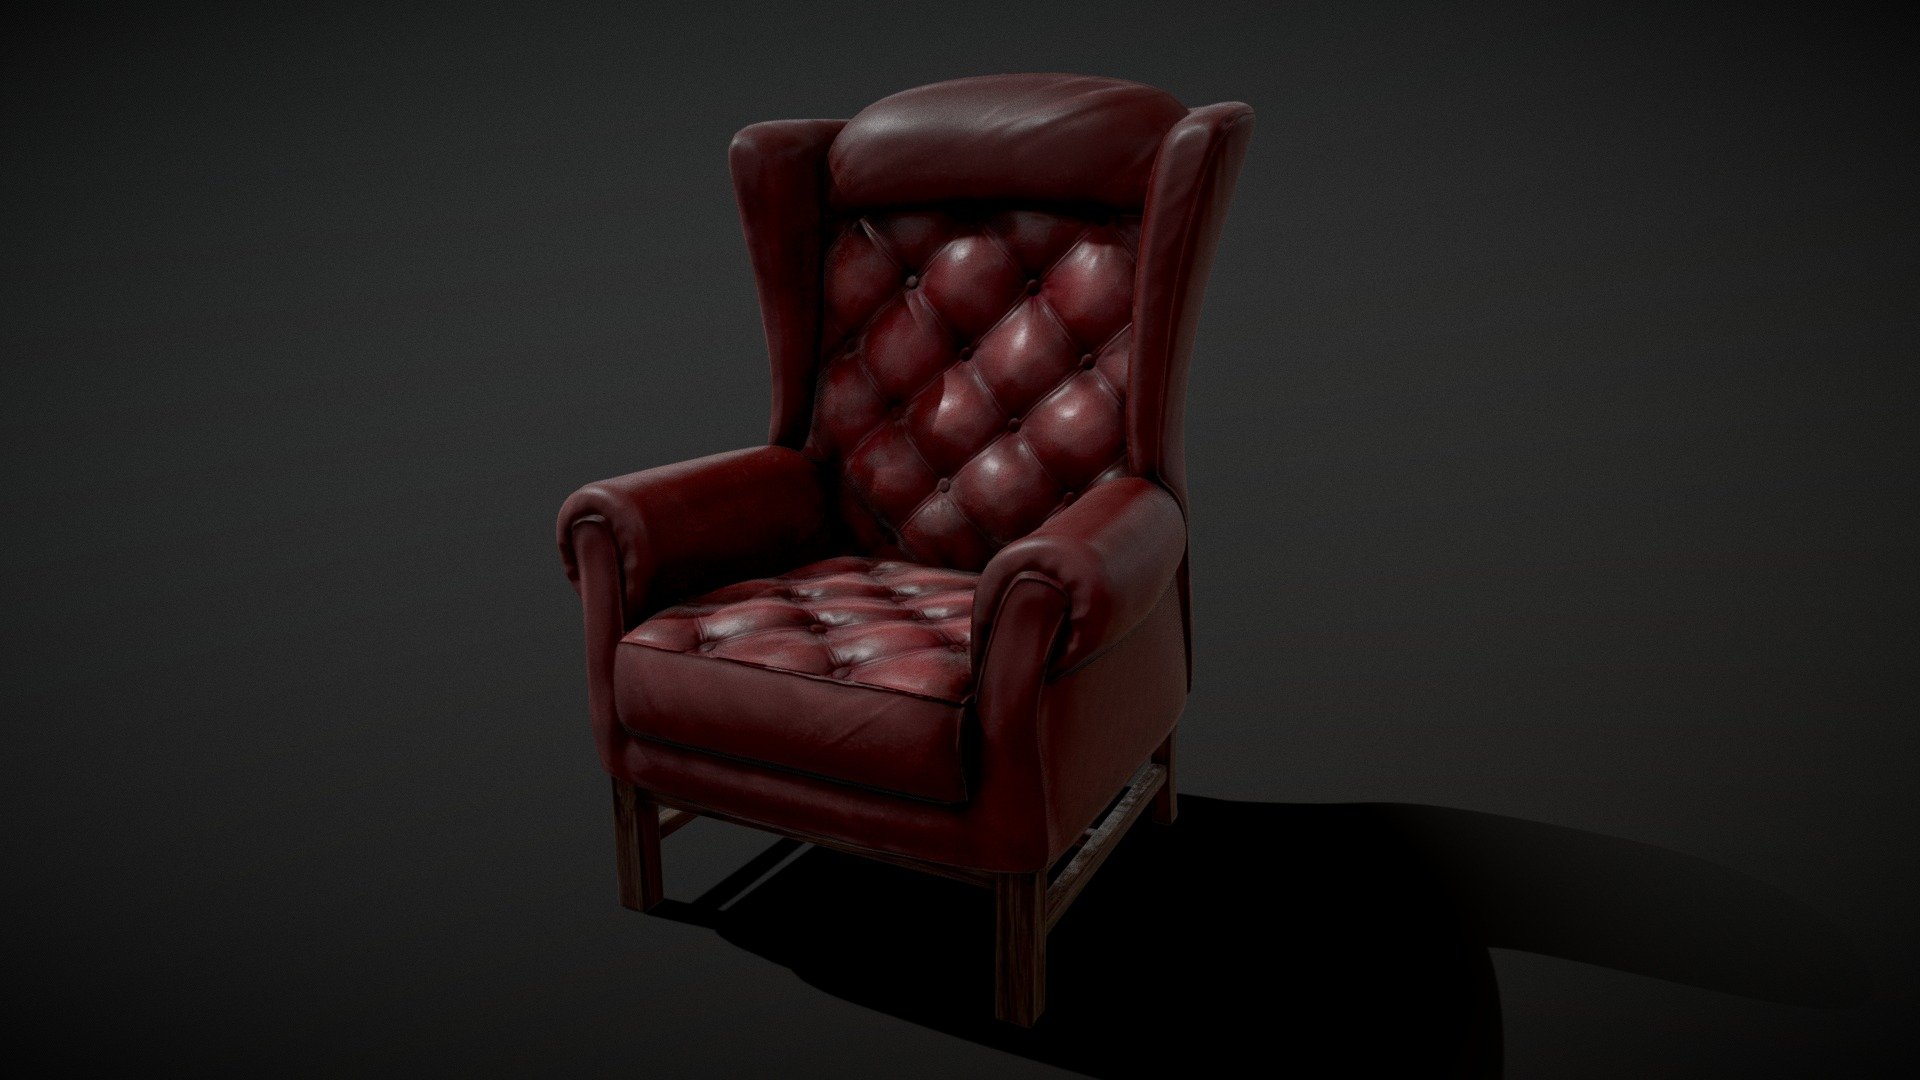 Classic leather armchair was sculpted in Zbrush. Can be used as a prop in games, animations, scenes etc. 
There are additional files added, such as high-poly fbx, and textures 3d model